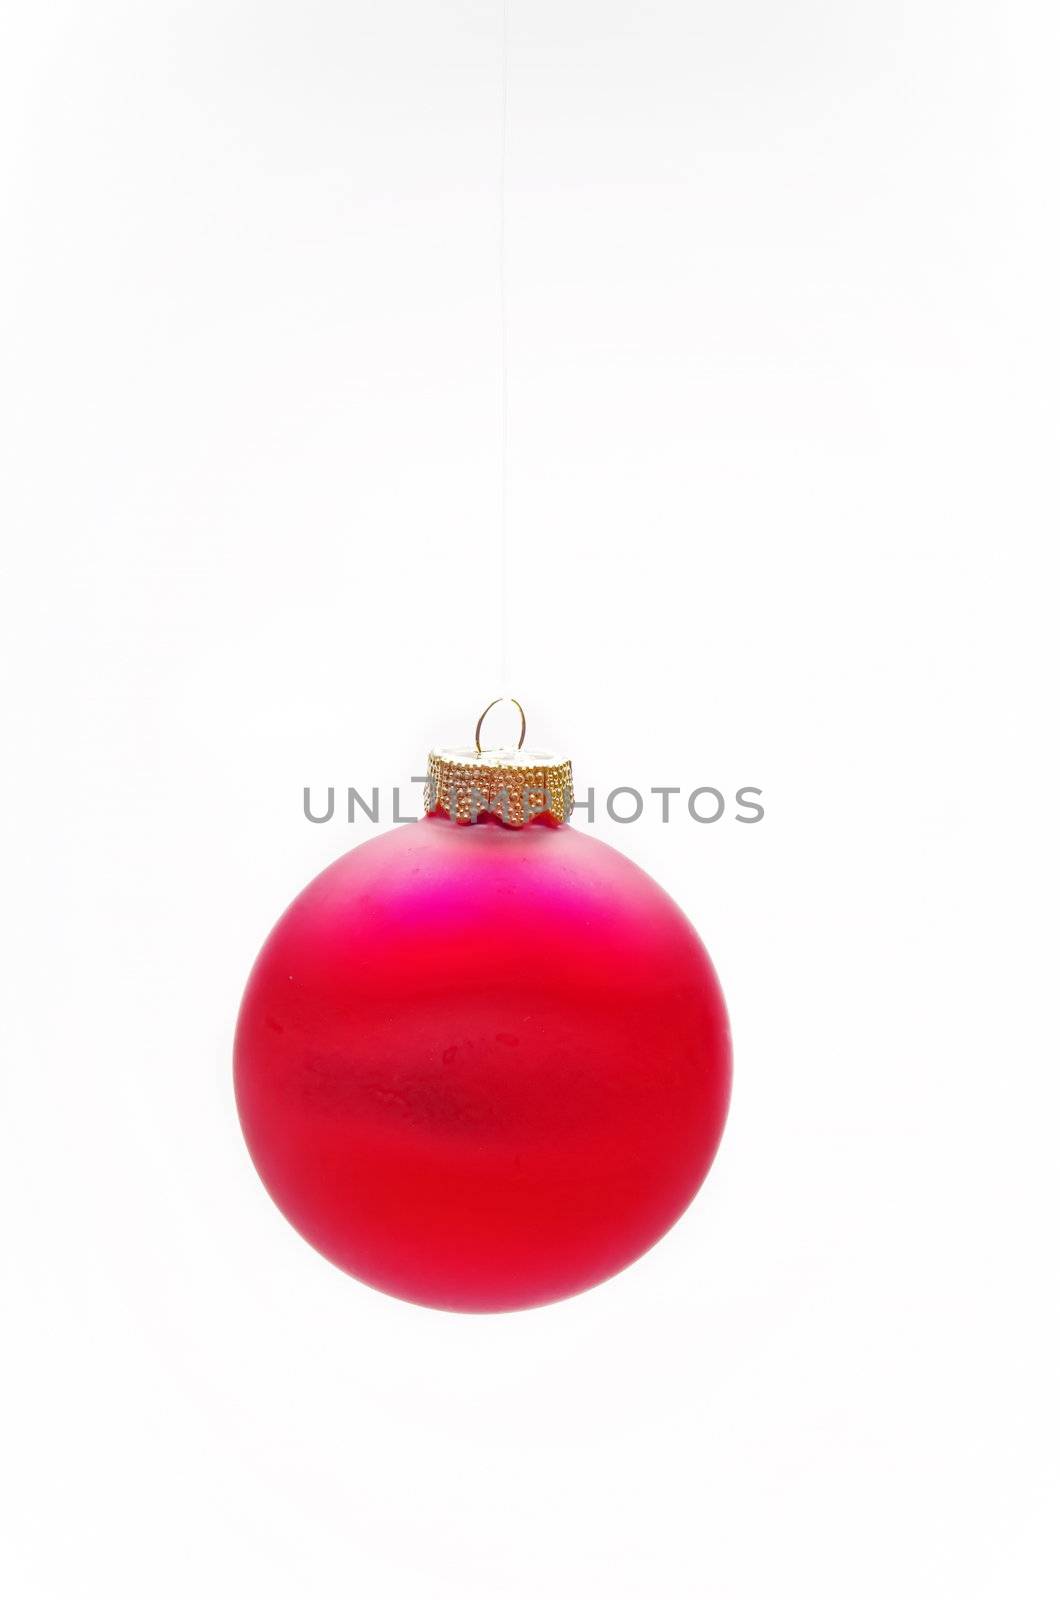 Red Christmas bauble, hanging from a wire, isolated on a white background.